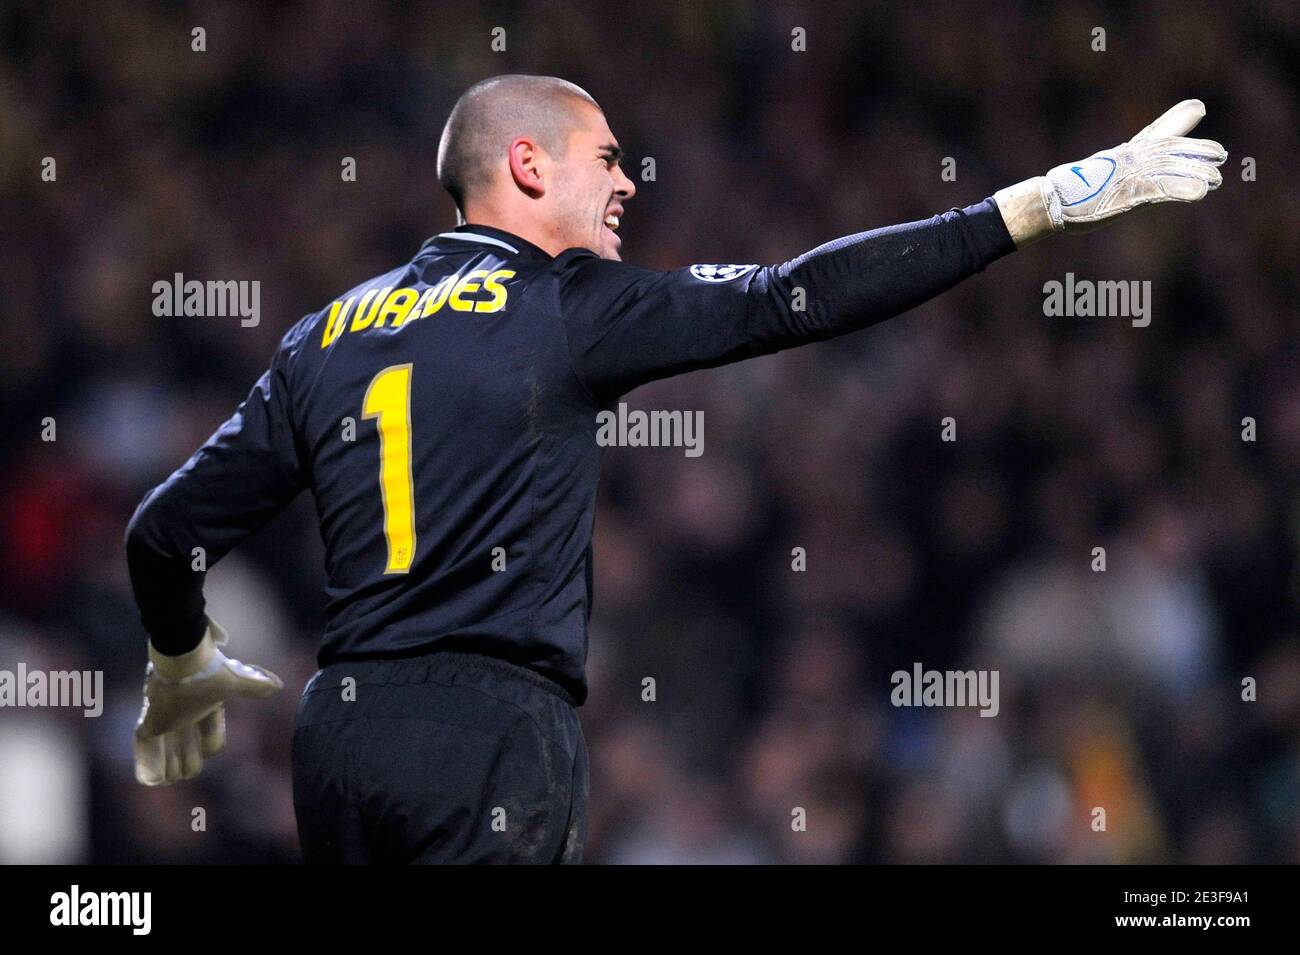 Barcelona's goalkeeper Victor Valdes during the UEFA Champions League - First Knockout Round - First Leg - Lyon vs Barcelona in Lyon, France on February 24, 2009. The match ended in a 1-1 draw. Photo by Stephane Reix/ABACAPRESS.COM Stock Photo